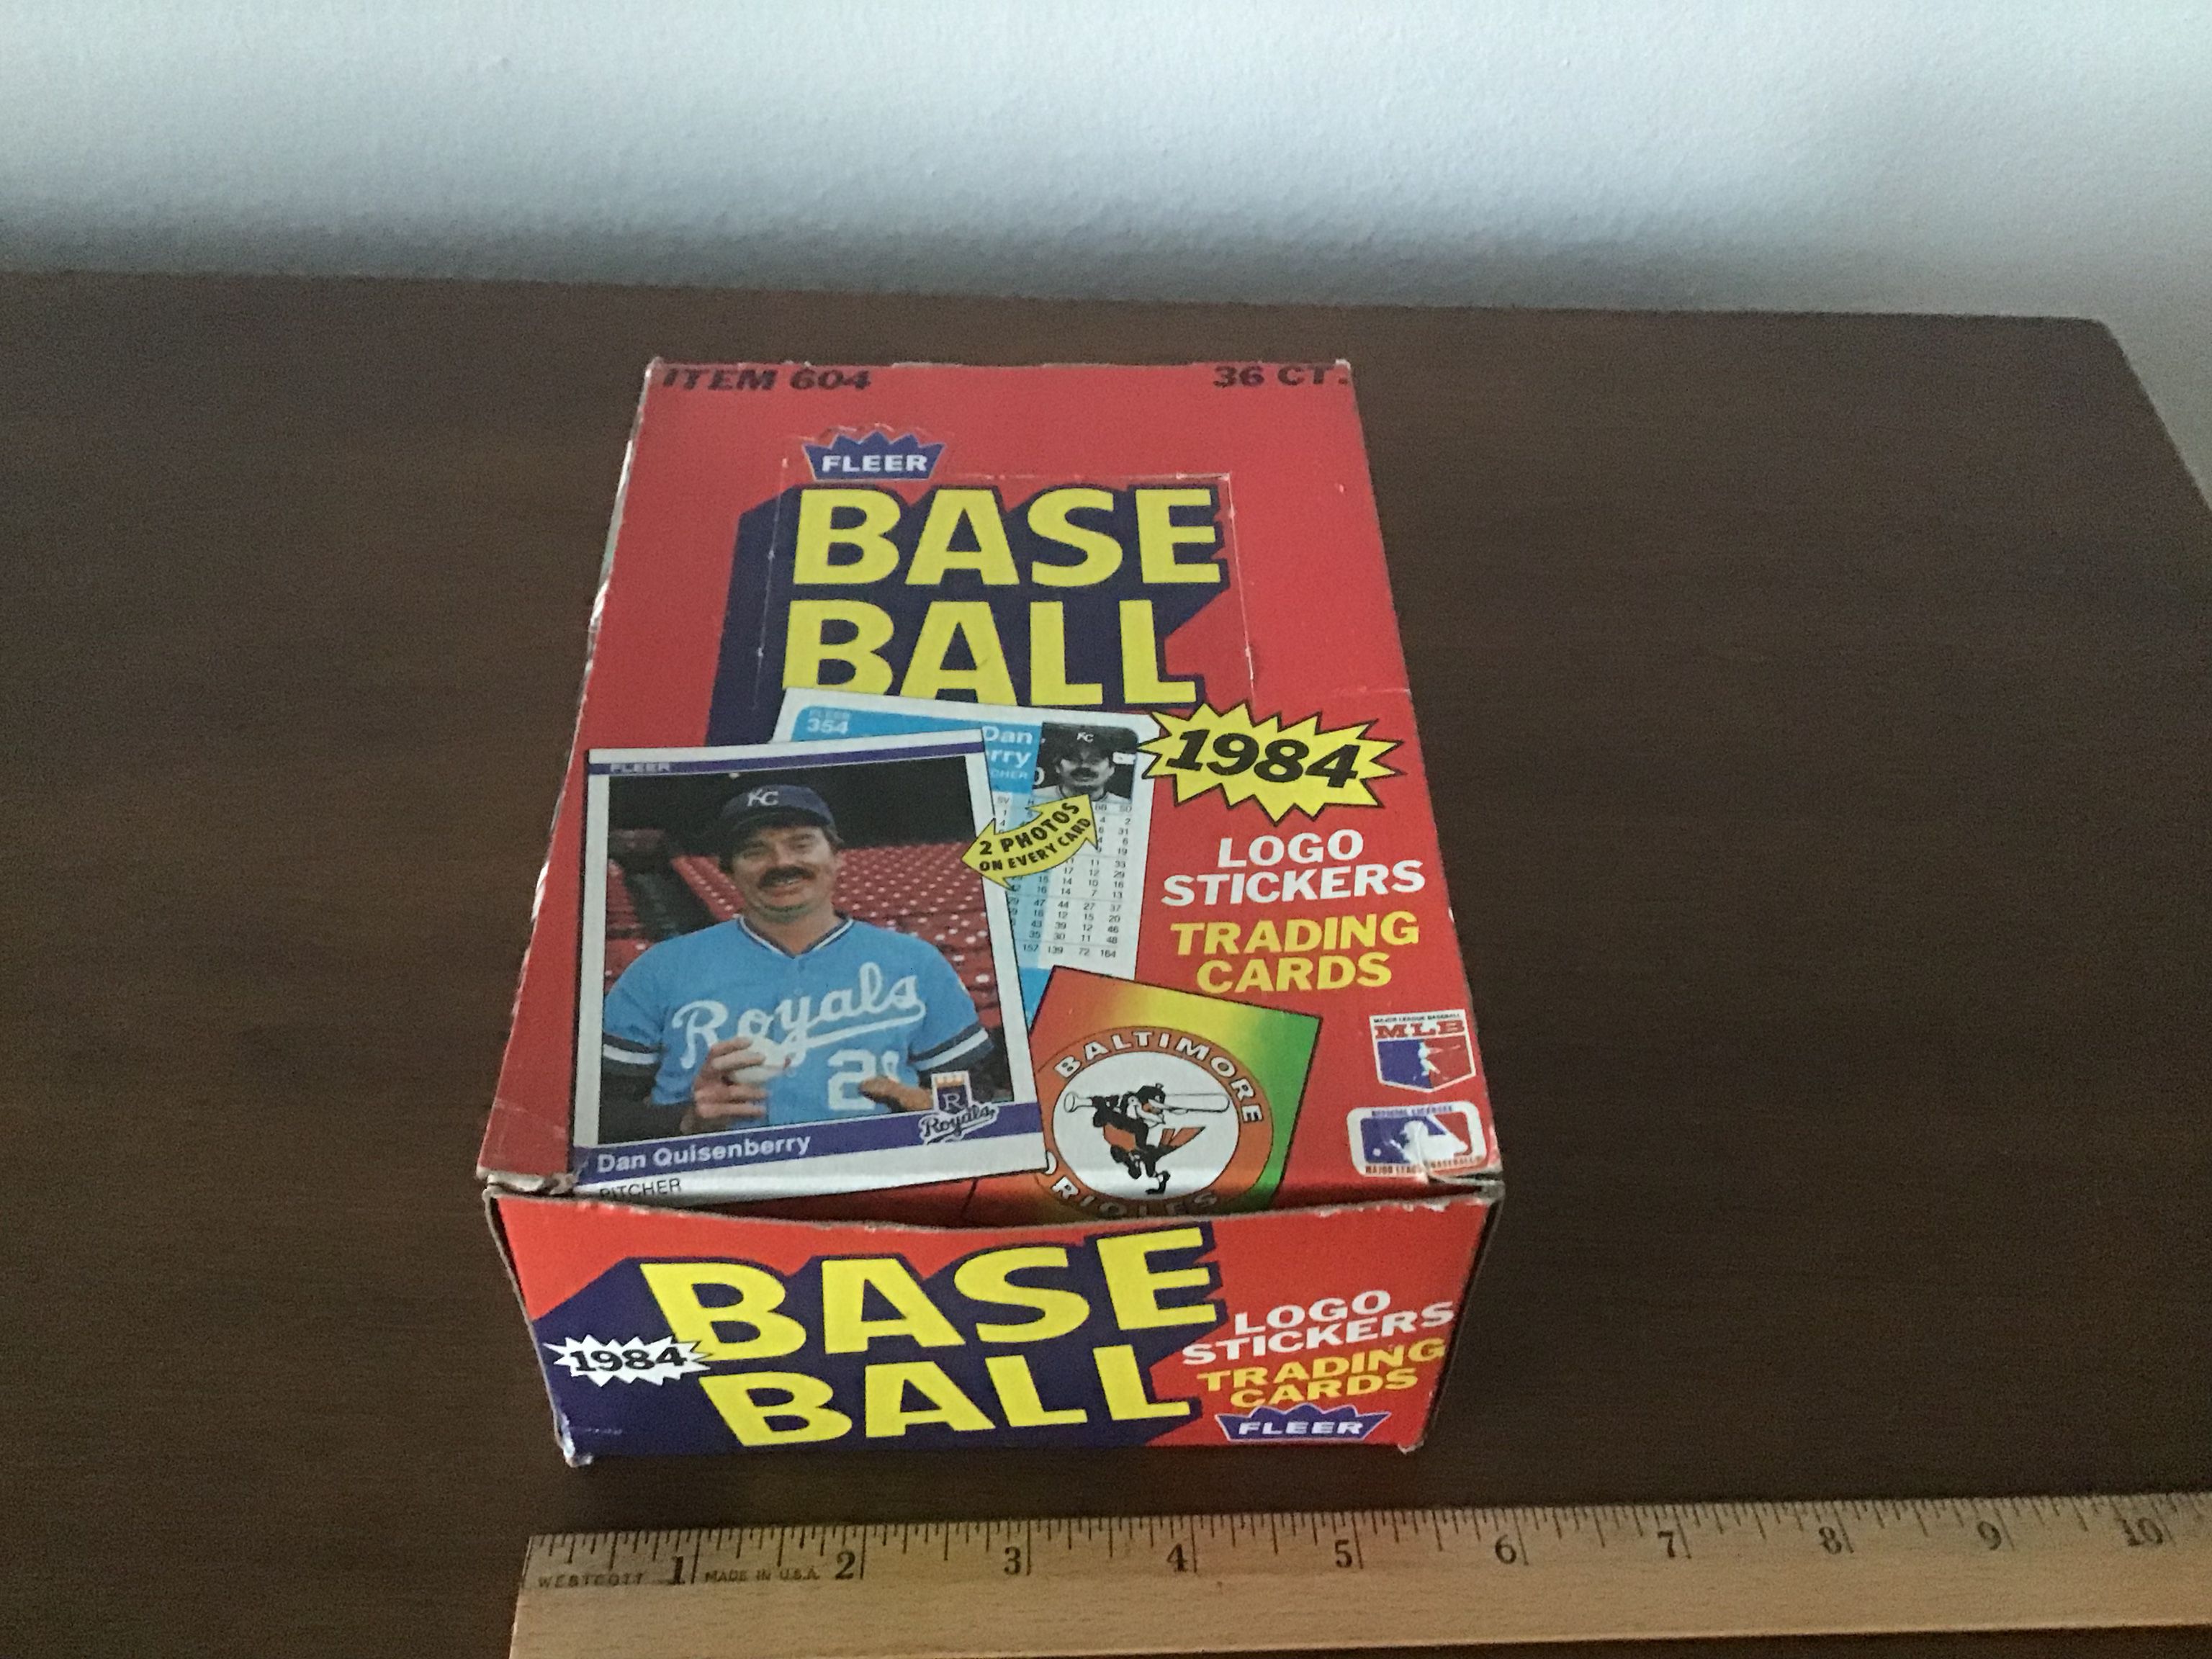 1984 FLEER Baseball Box (Opened) With 36ct Unwrapped Baseball Cards